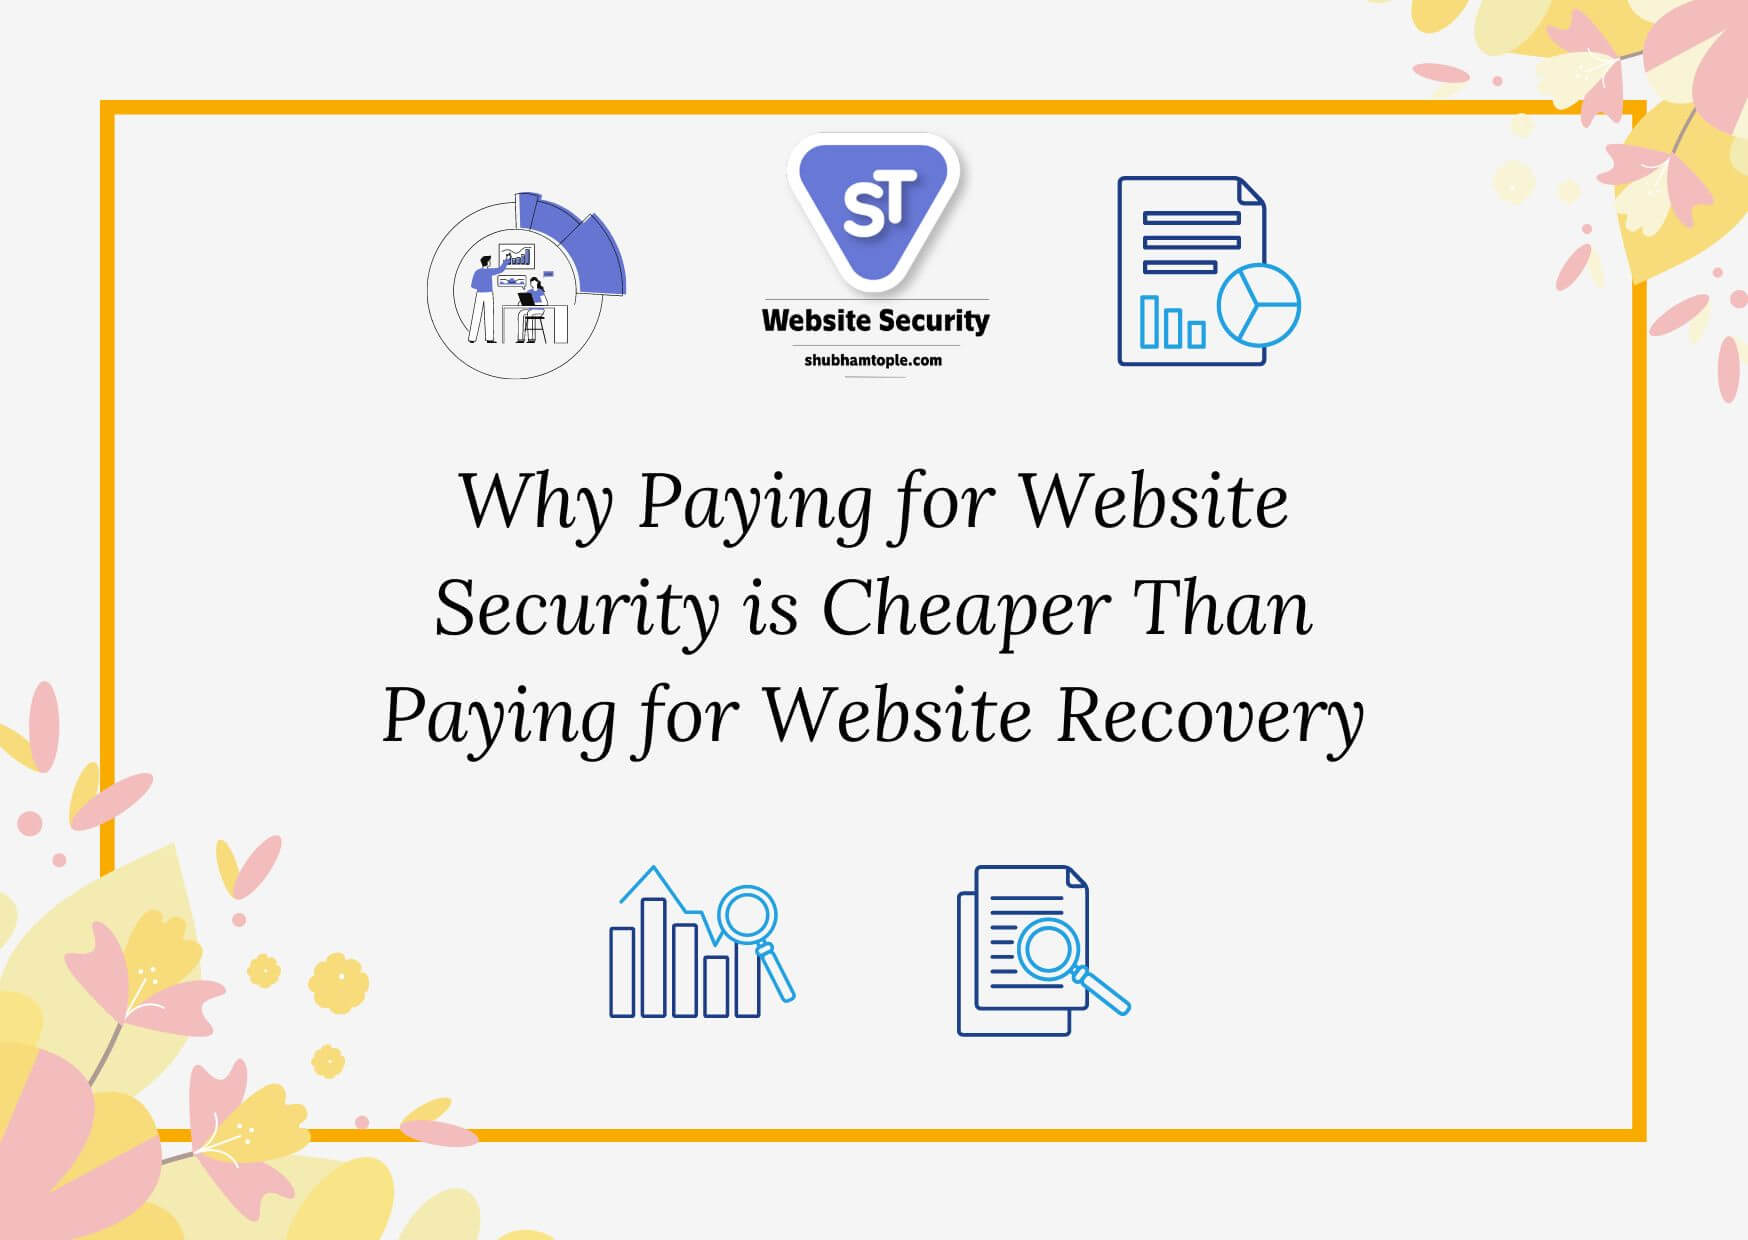 Why Paying for Website Security is Cheaper Than Paying for Website Recovery